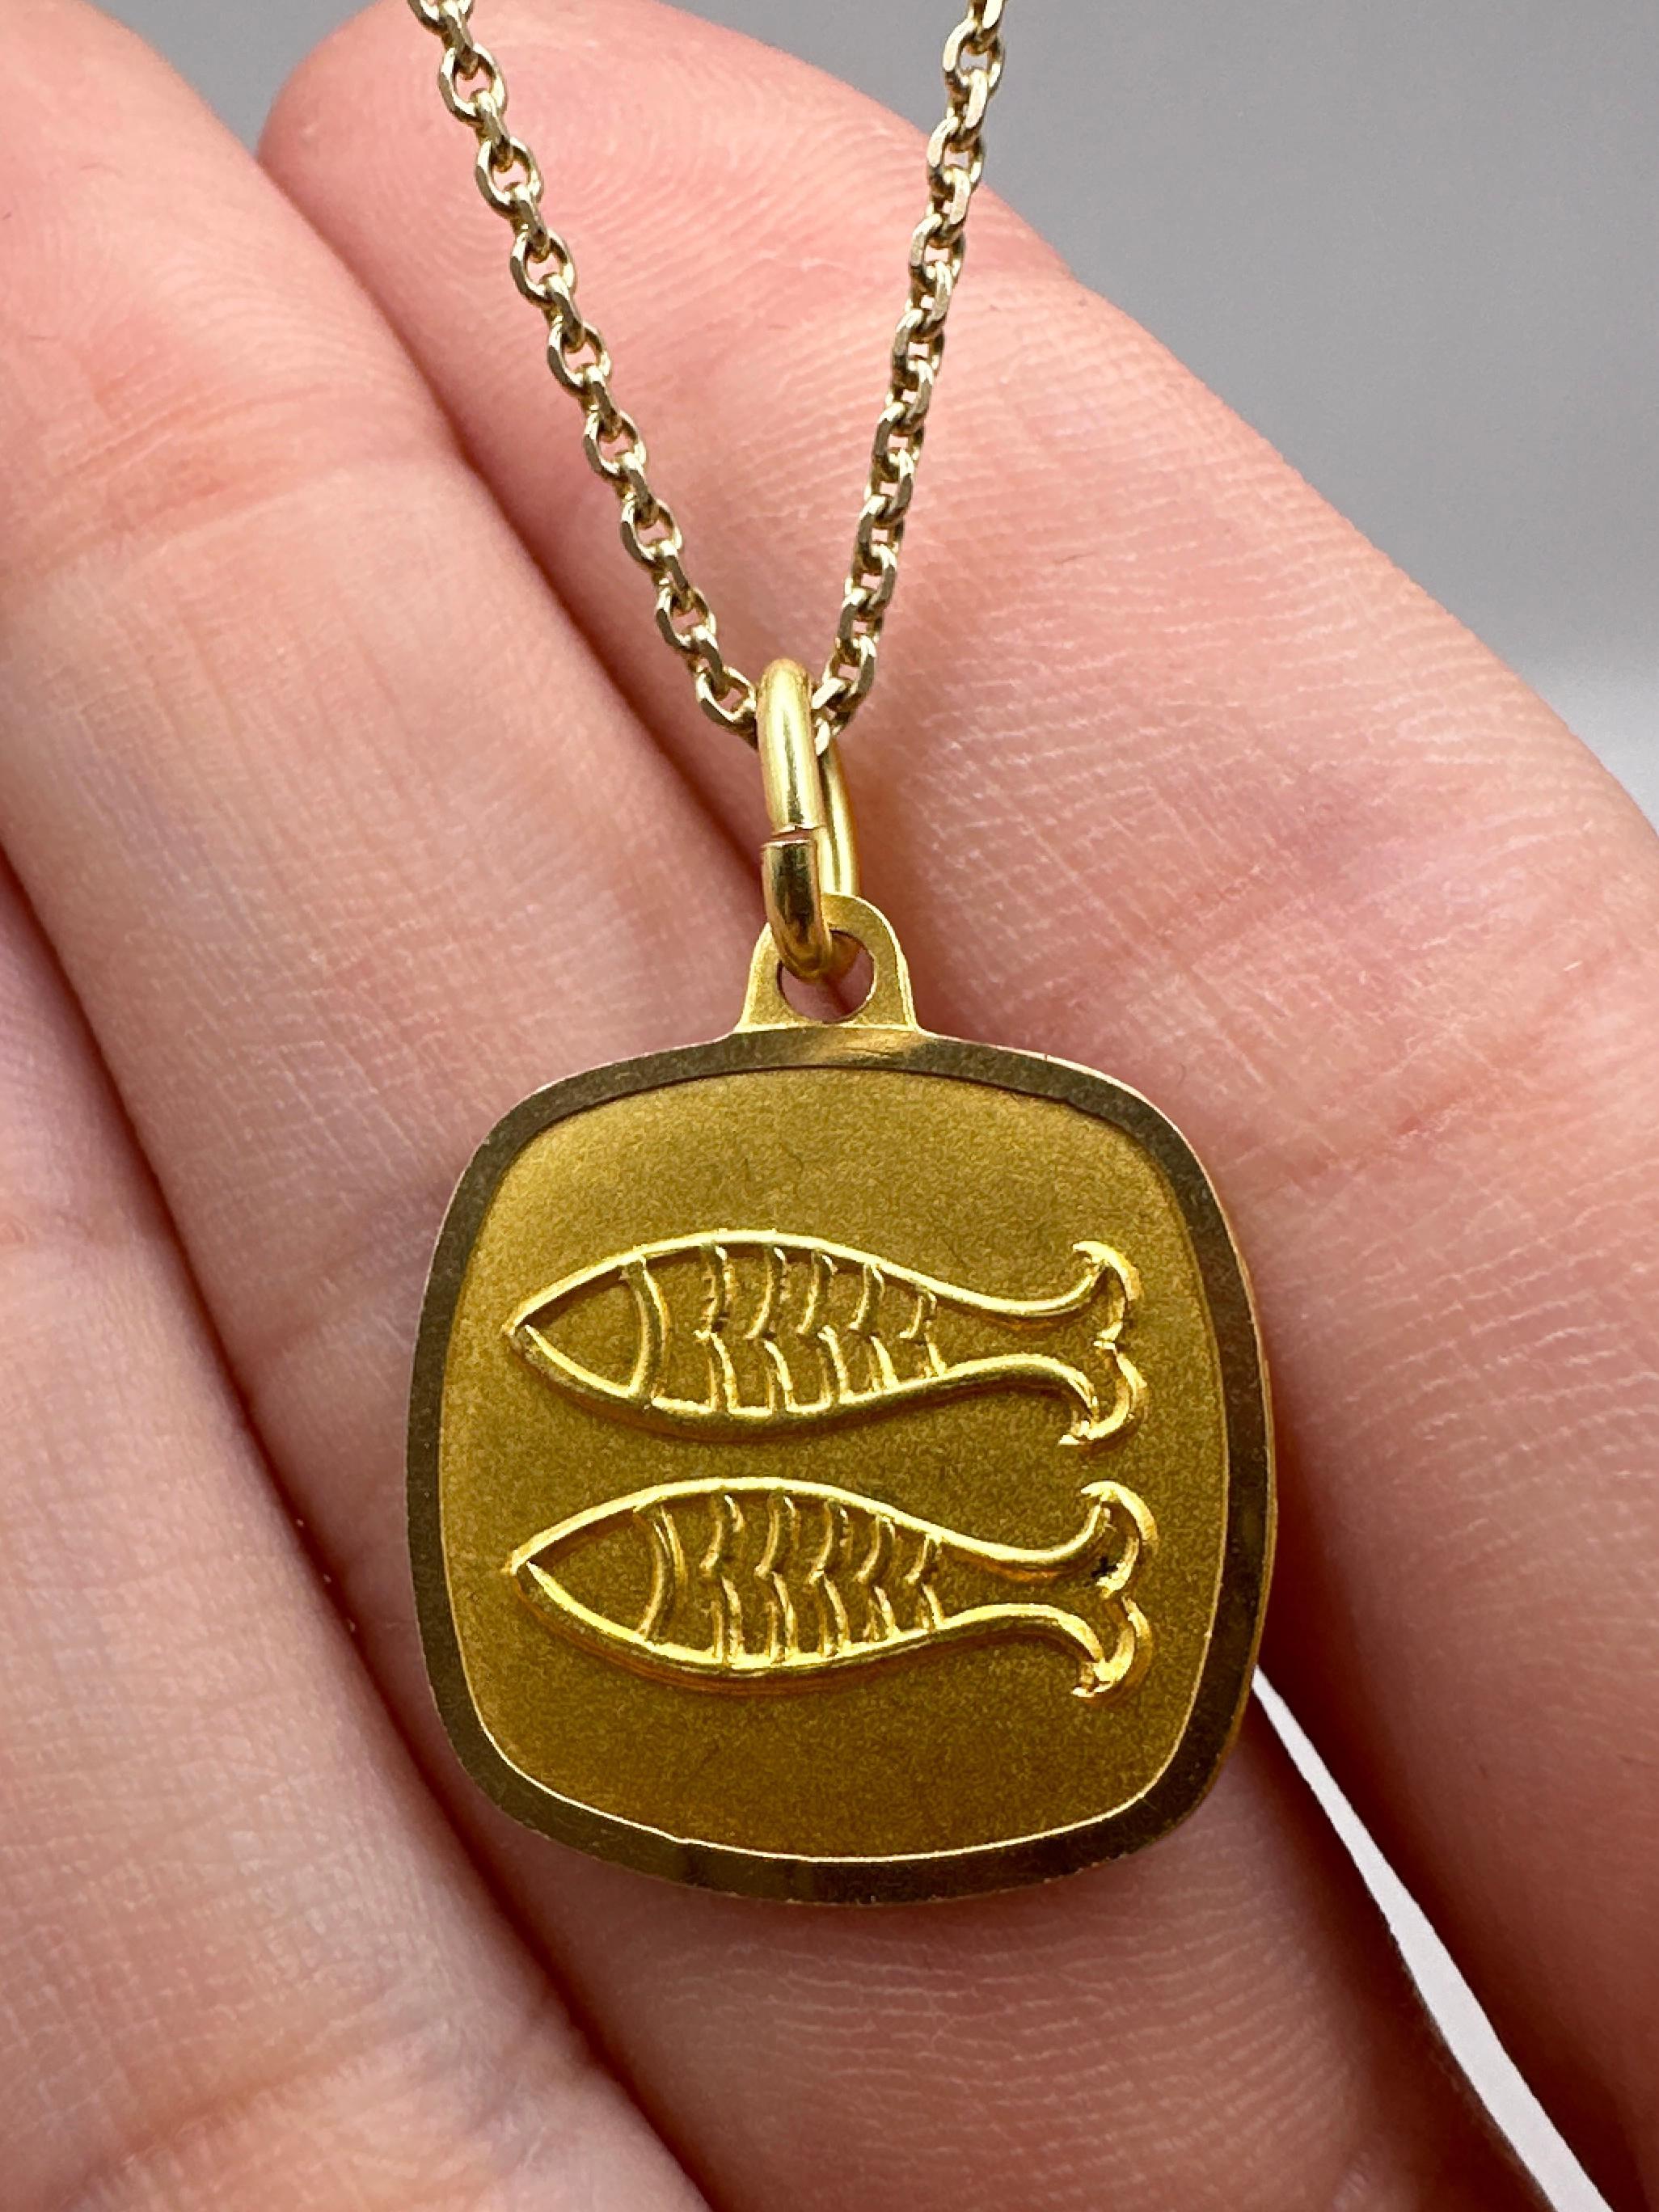 Embrace being a Pisces with this beautifully crafted 18k Yellow Gold Pisces Pendant, complete with a 14k chain. The stunning yellow gold and intricate markings make it a unique statement piece. From the 1960's, it's in good condition with some minor